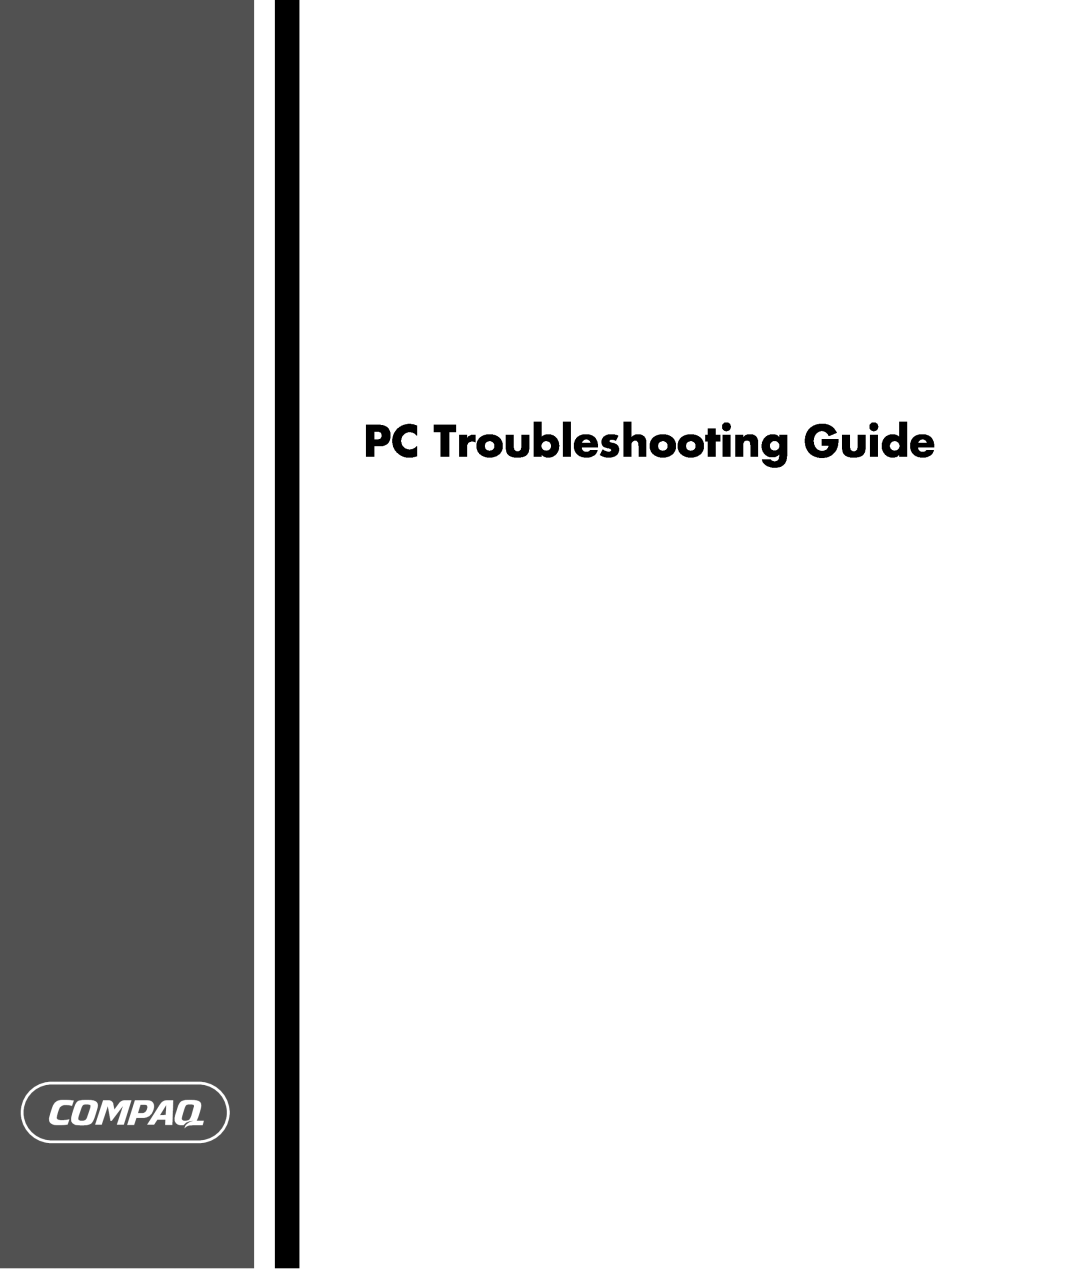 HP SR1660CF, SR1680CF, SR1660AN, SR1650NX, SR1630NX, SR1640AP, SR1638NX, SR1620NX, SR1620AN manual PC Troubleshooting Guide 